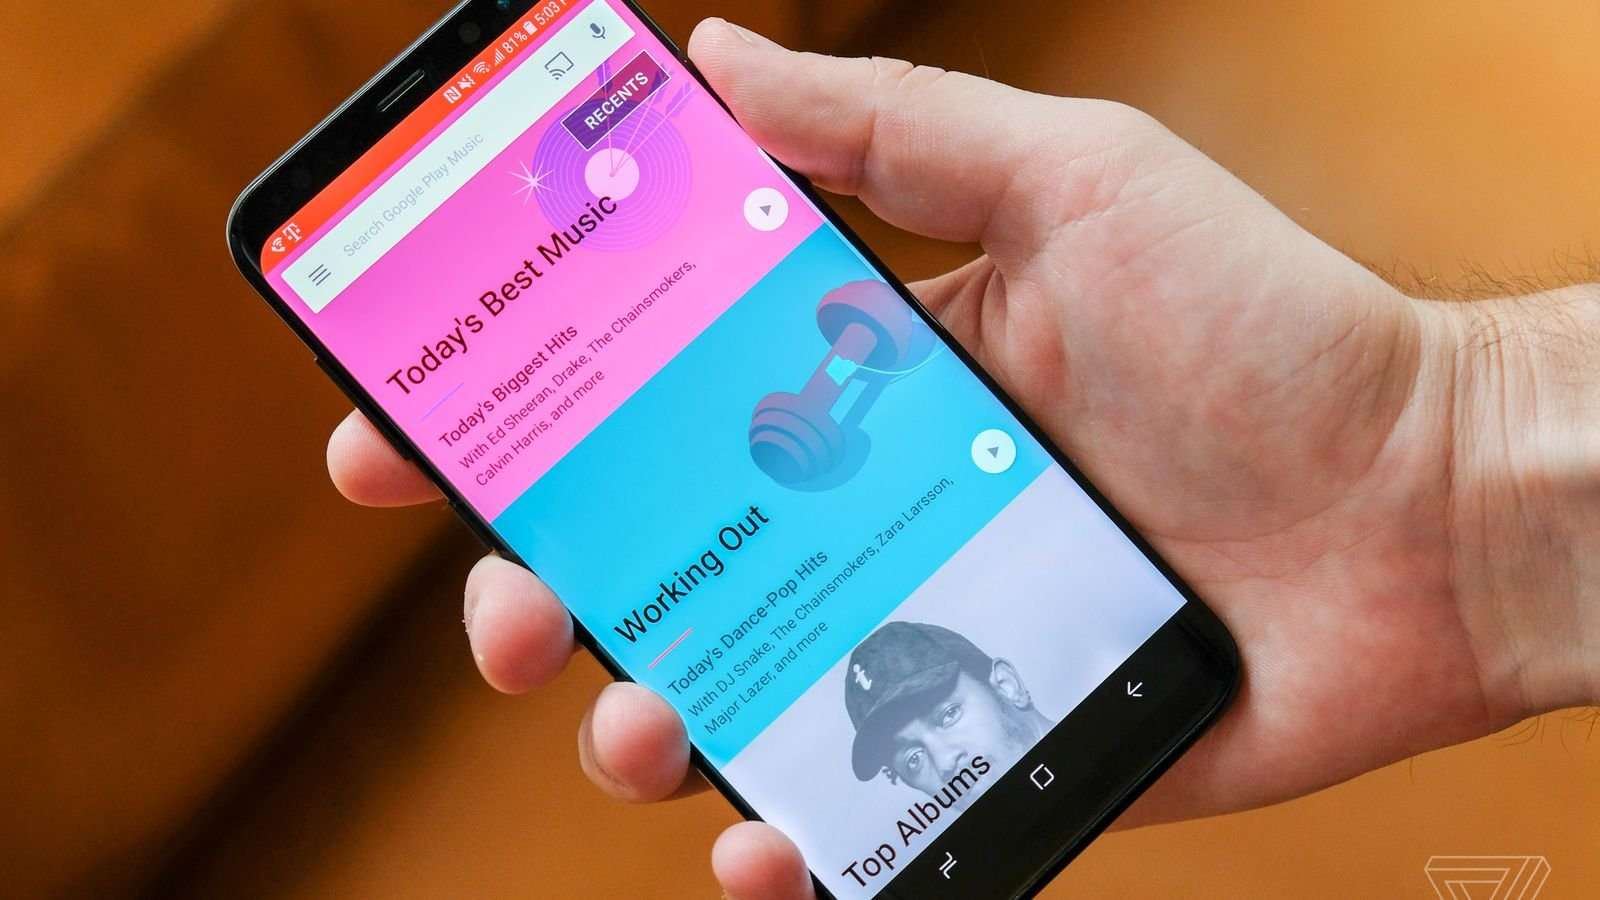 image for Samsung will use Google Play Music as the default music app on its devices